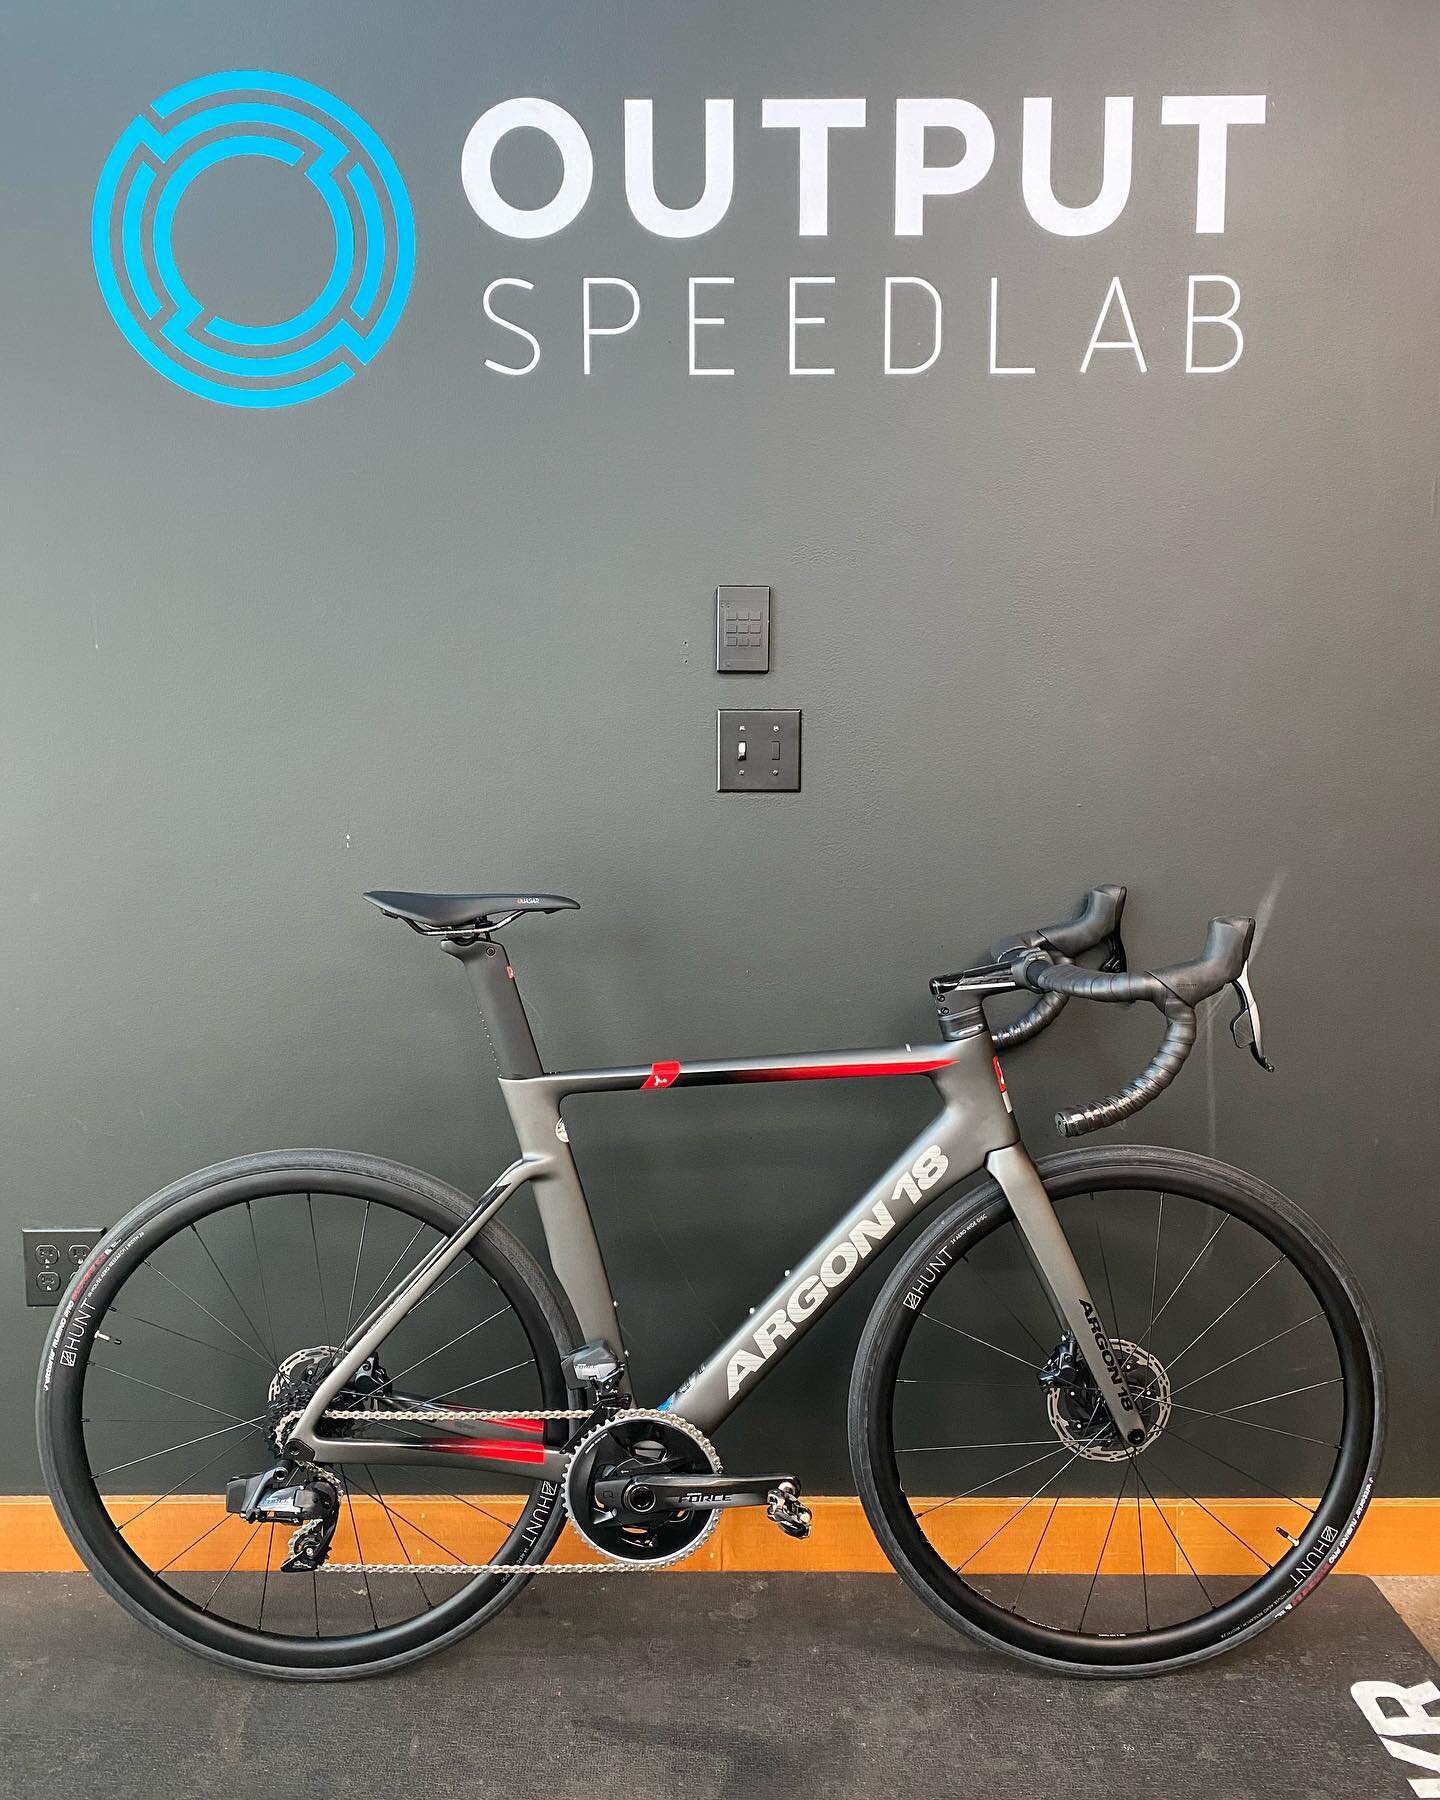 Getting new bikes (and components) in the Lab this year is been a challenge to say the least. So, it&rsquo;s a special treat when &ldquo;New Bike Day&rdquo; comes for our clients. How clean is this @argon18bike Nitrogen Force AXS aero road bike we bu